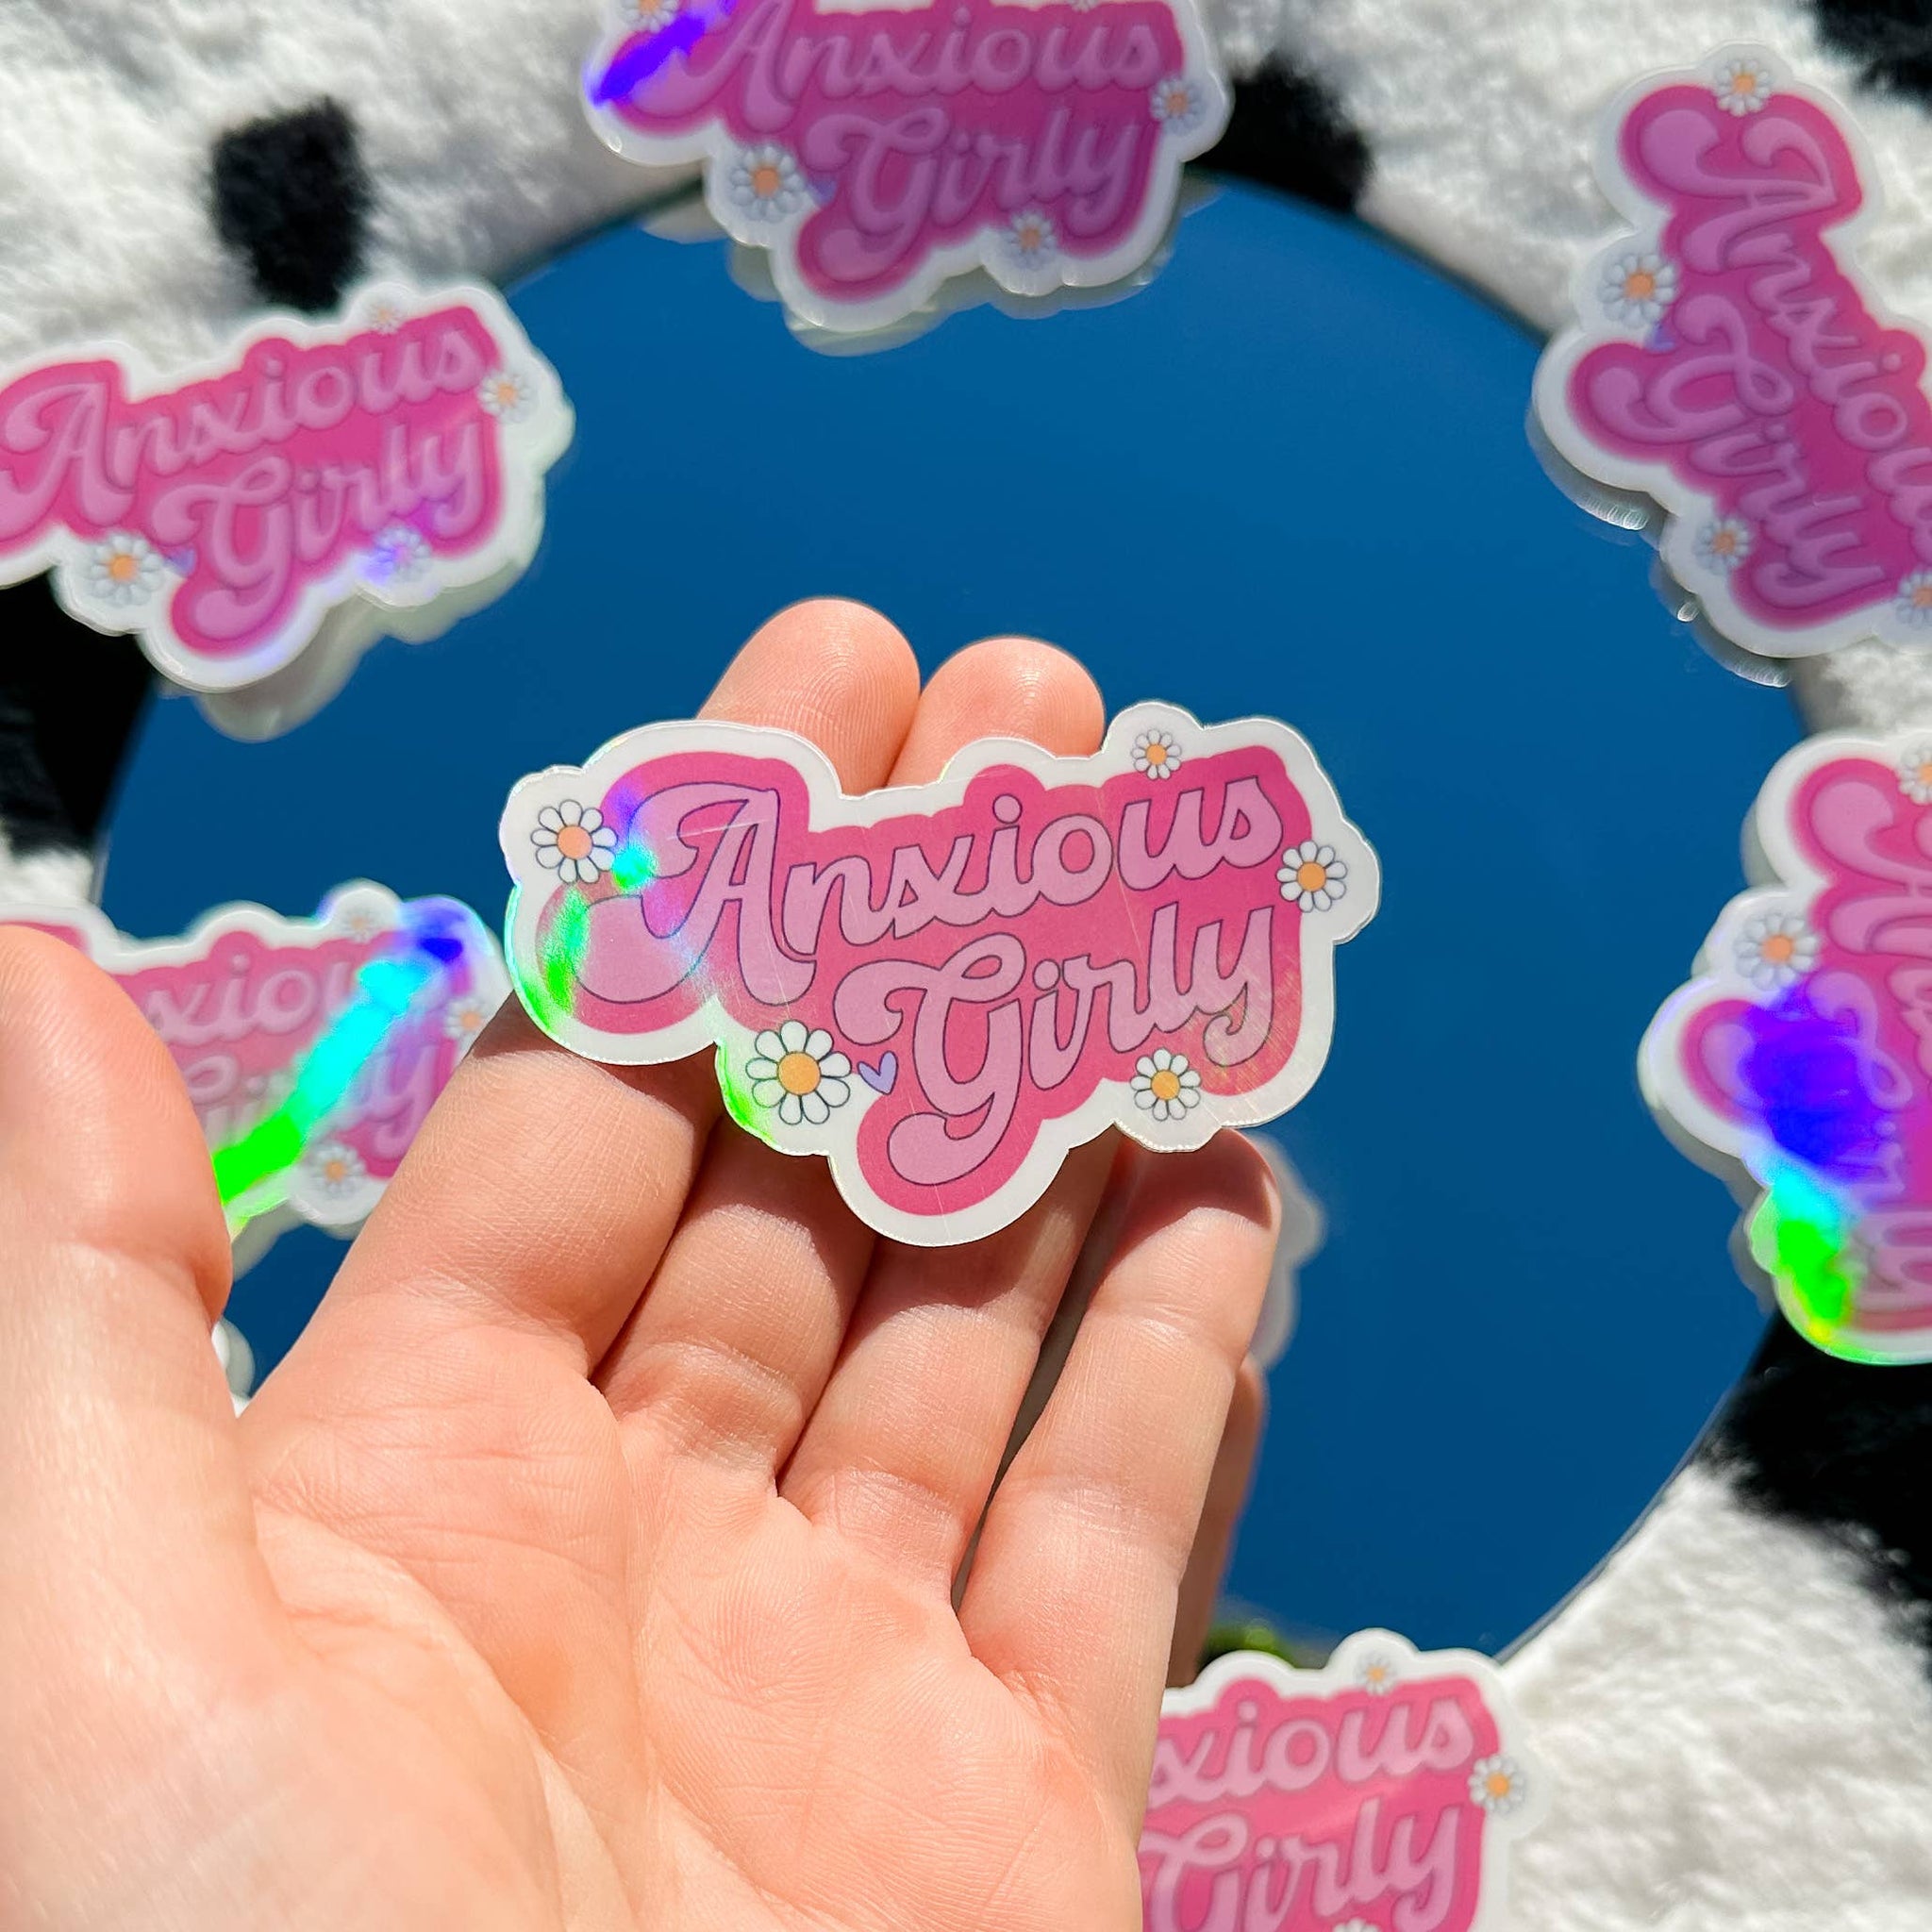 "Anxious Girly" Holographic Sticker